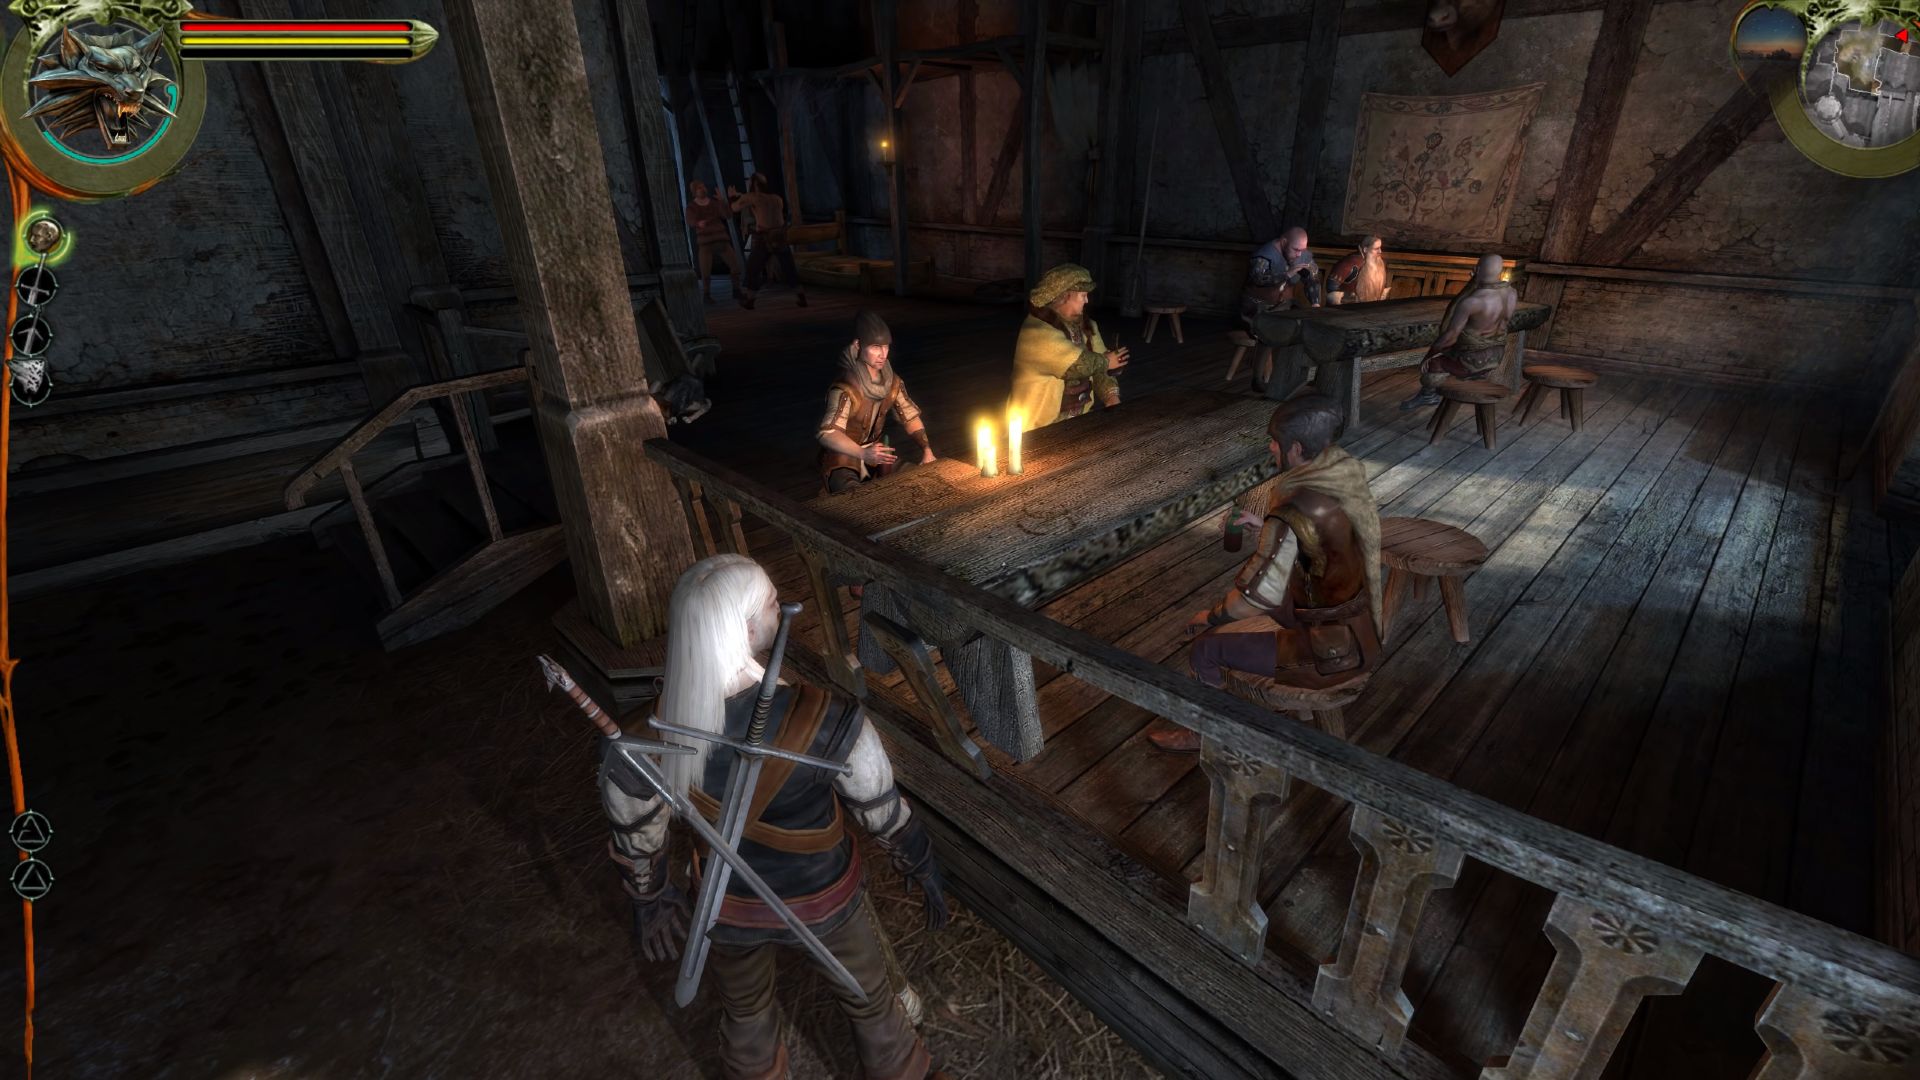 The Witcher 1 is the Best Game with the Worst Gameplay, Fans Agree